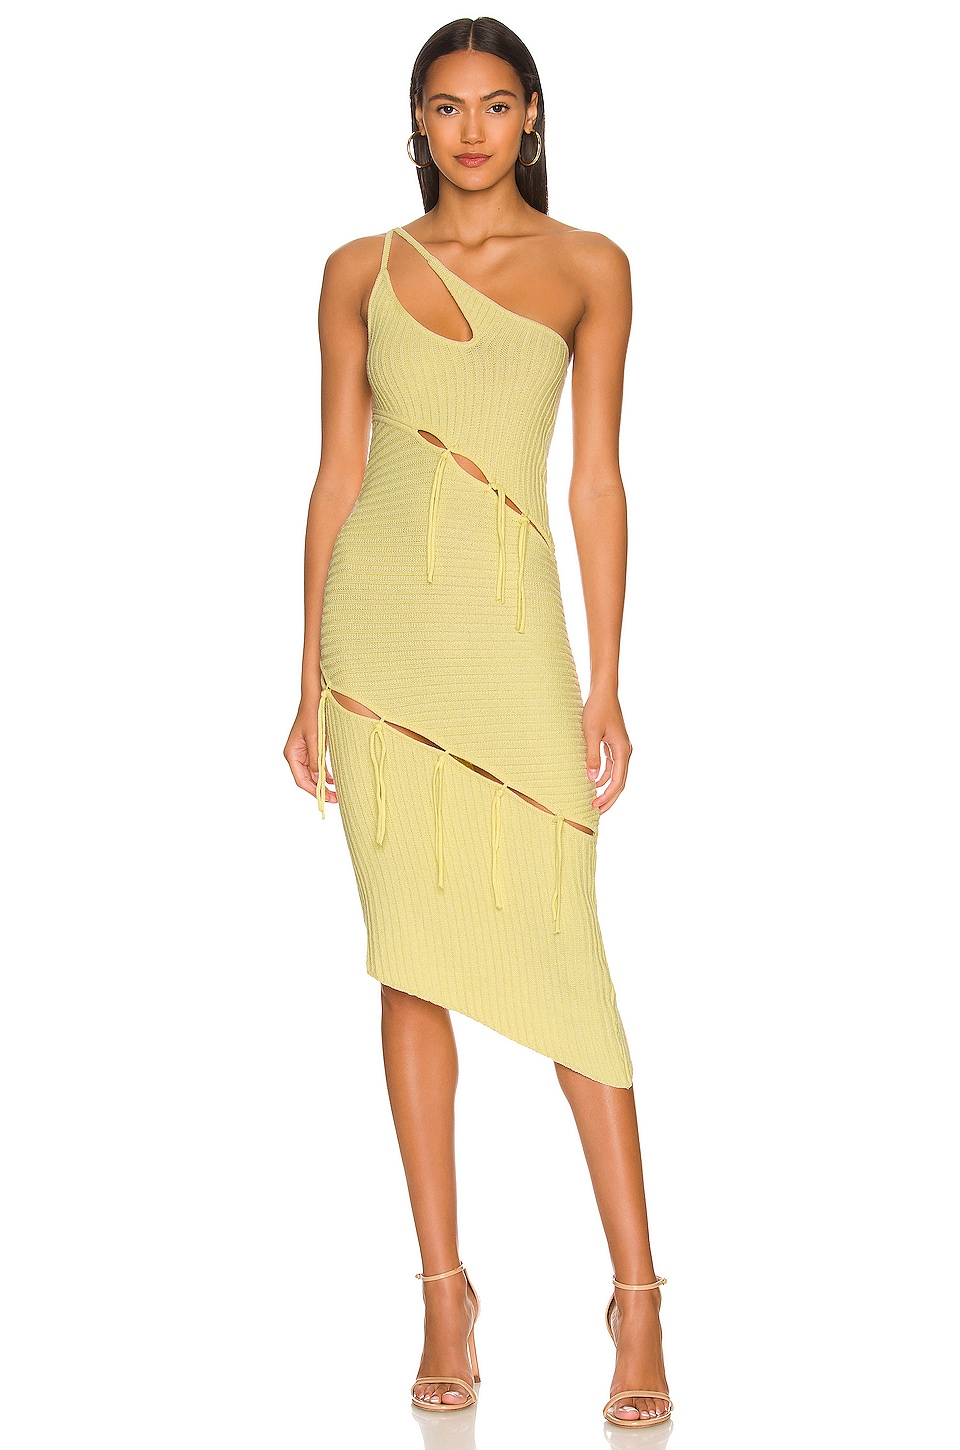 ALIX NYC Hirst Dress in Canary